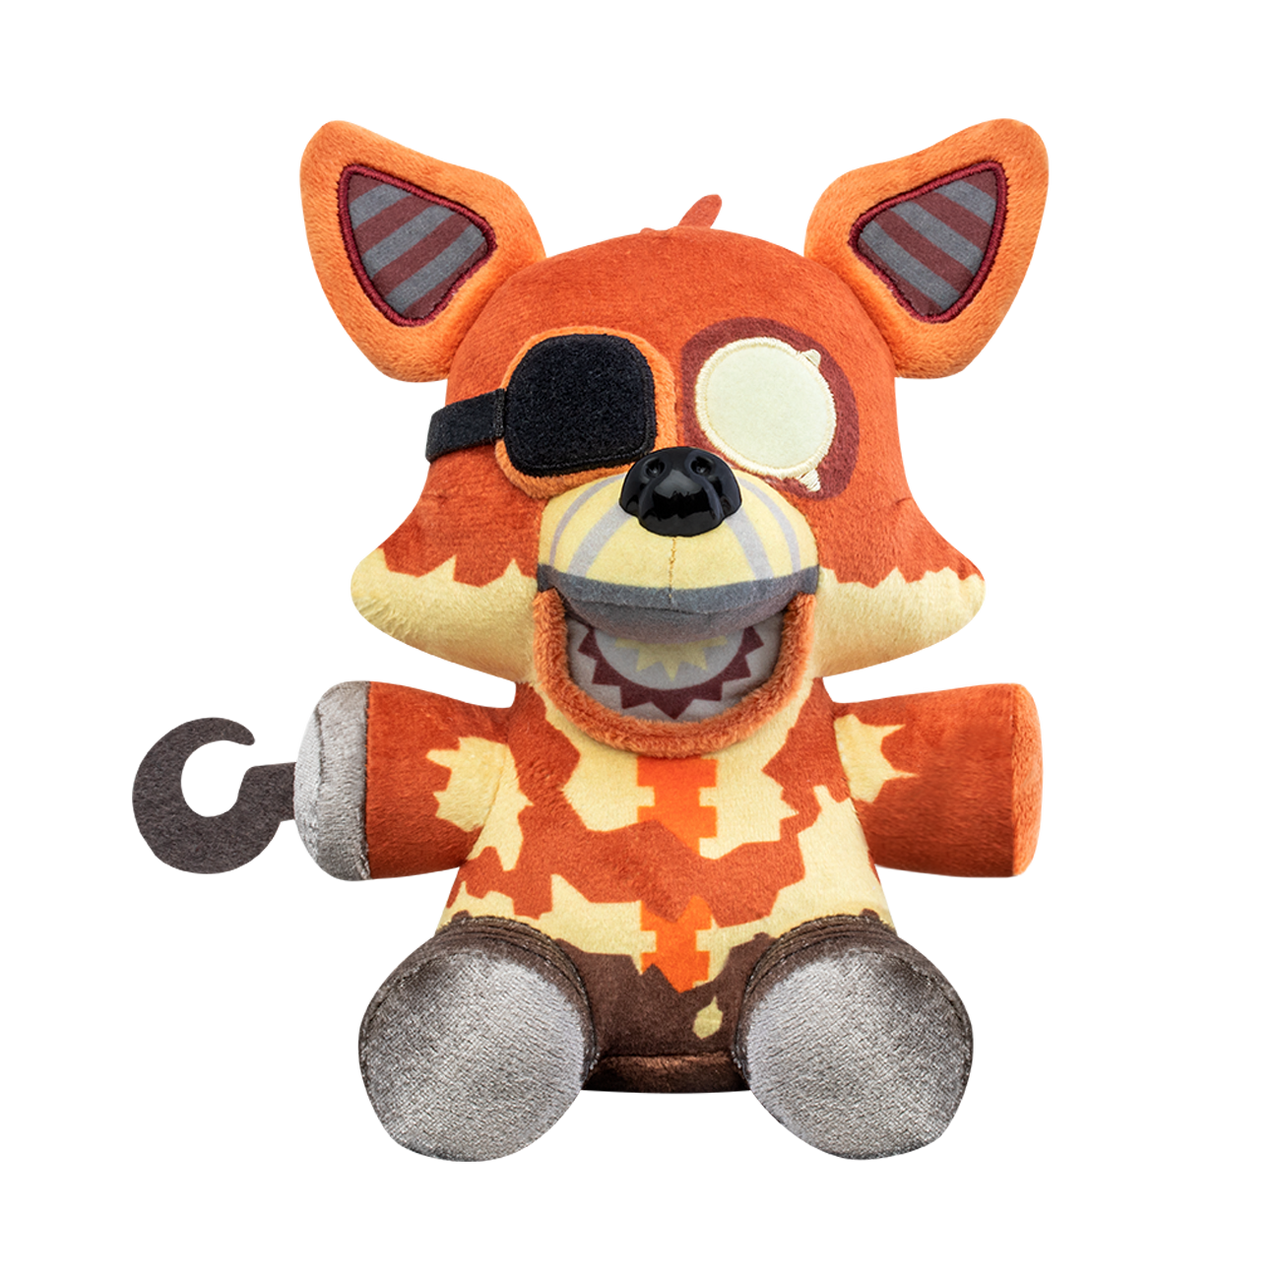 Glitchtrap Plush by GrimfoxProductions on DeviantArt